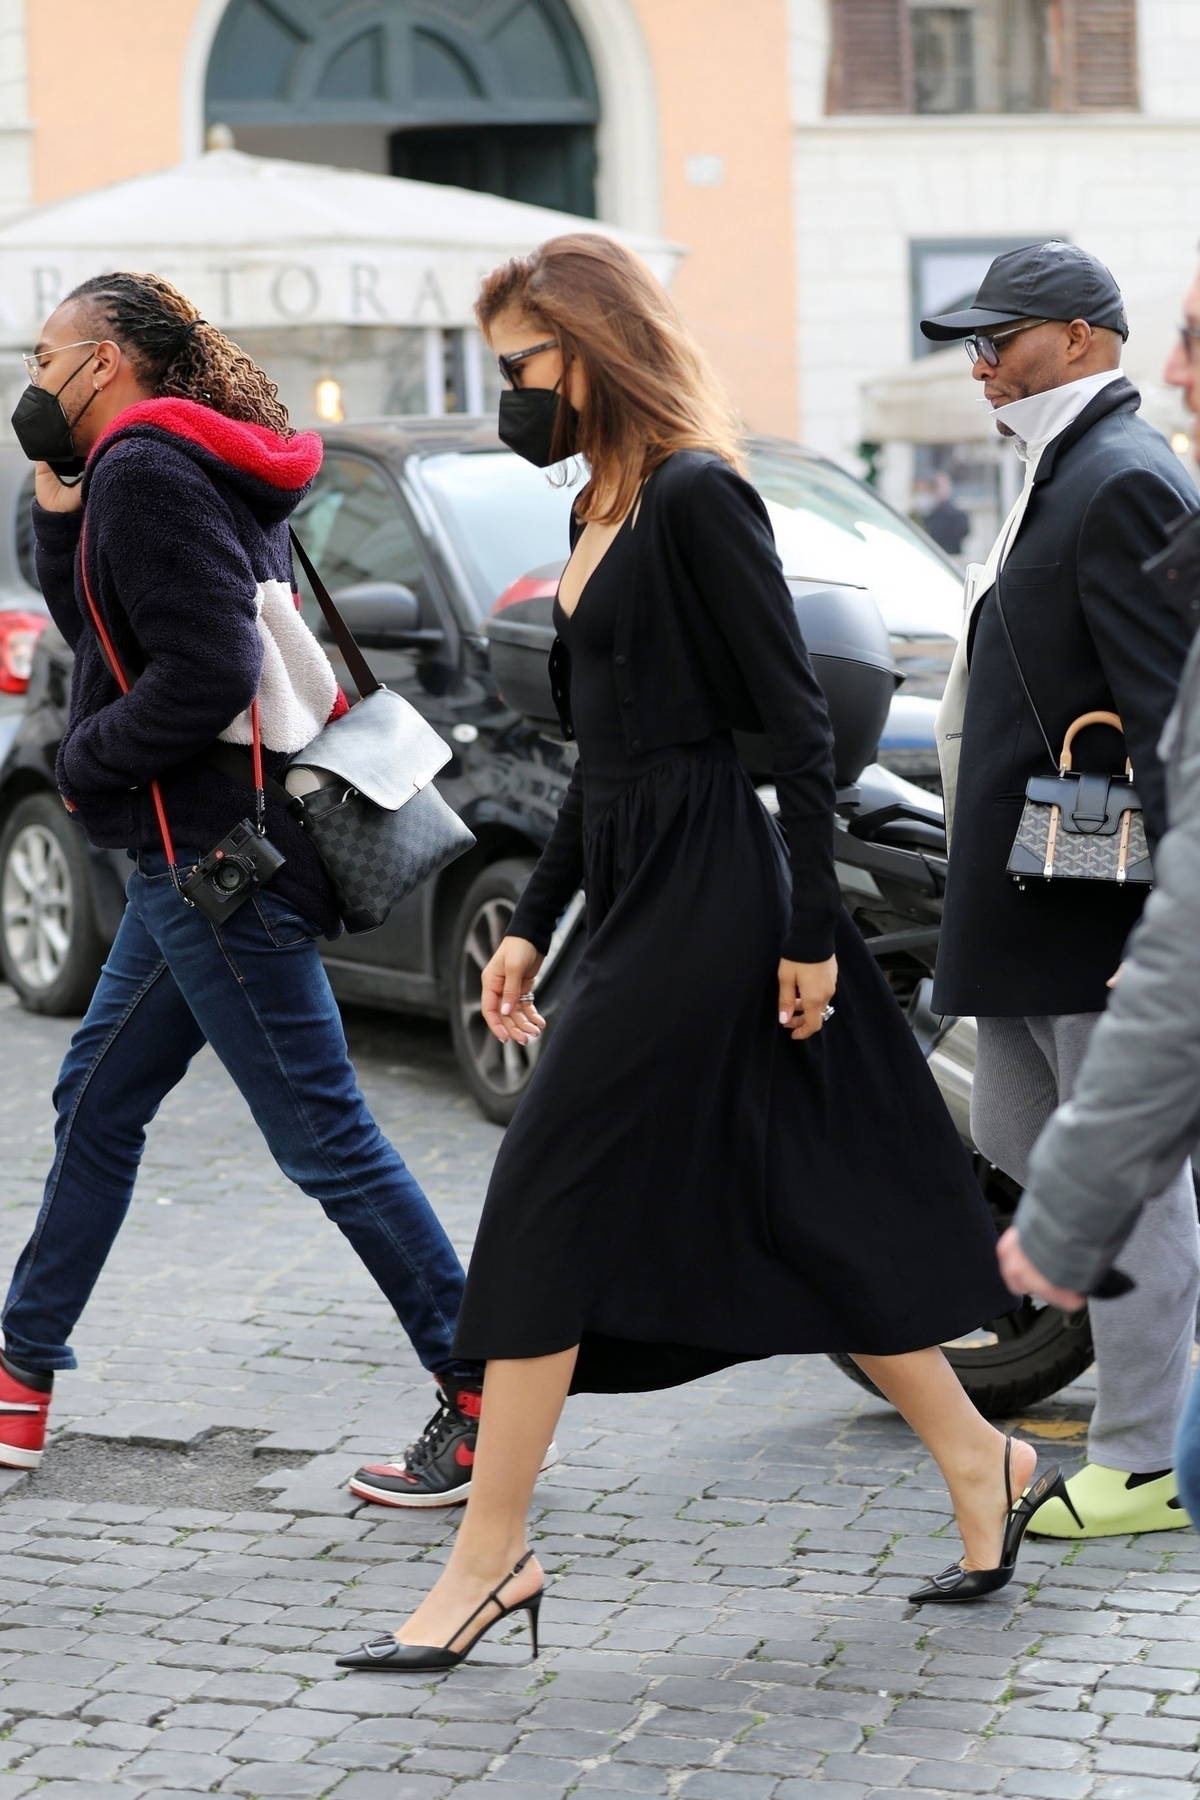 Zendaya shows off her style in Rome: 'Got this suit an hour before the  event' - ABC News